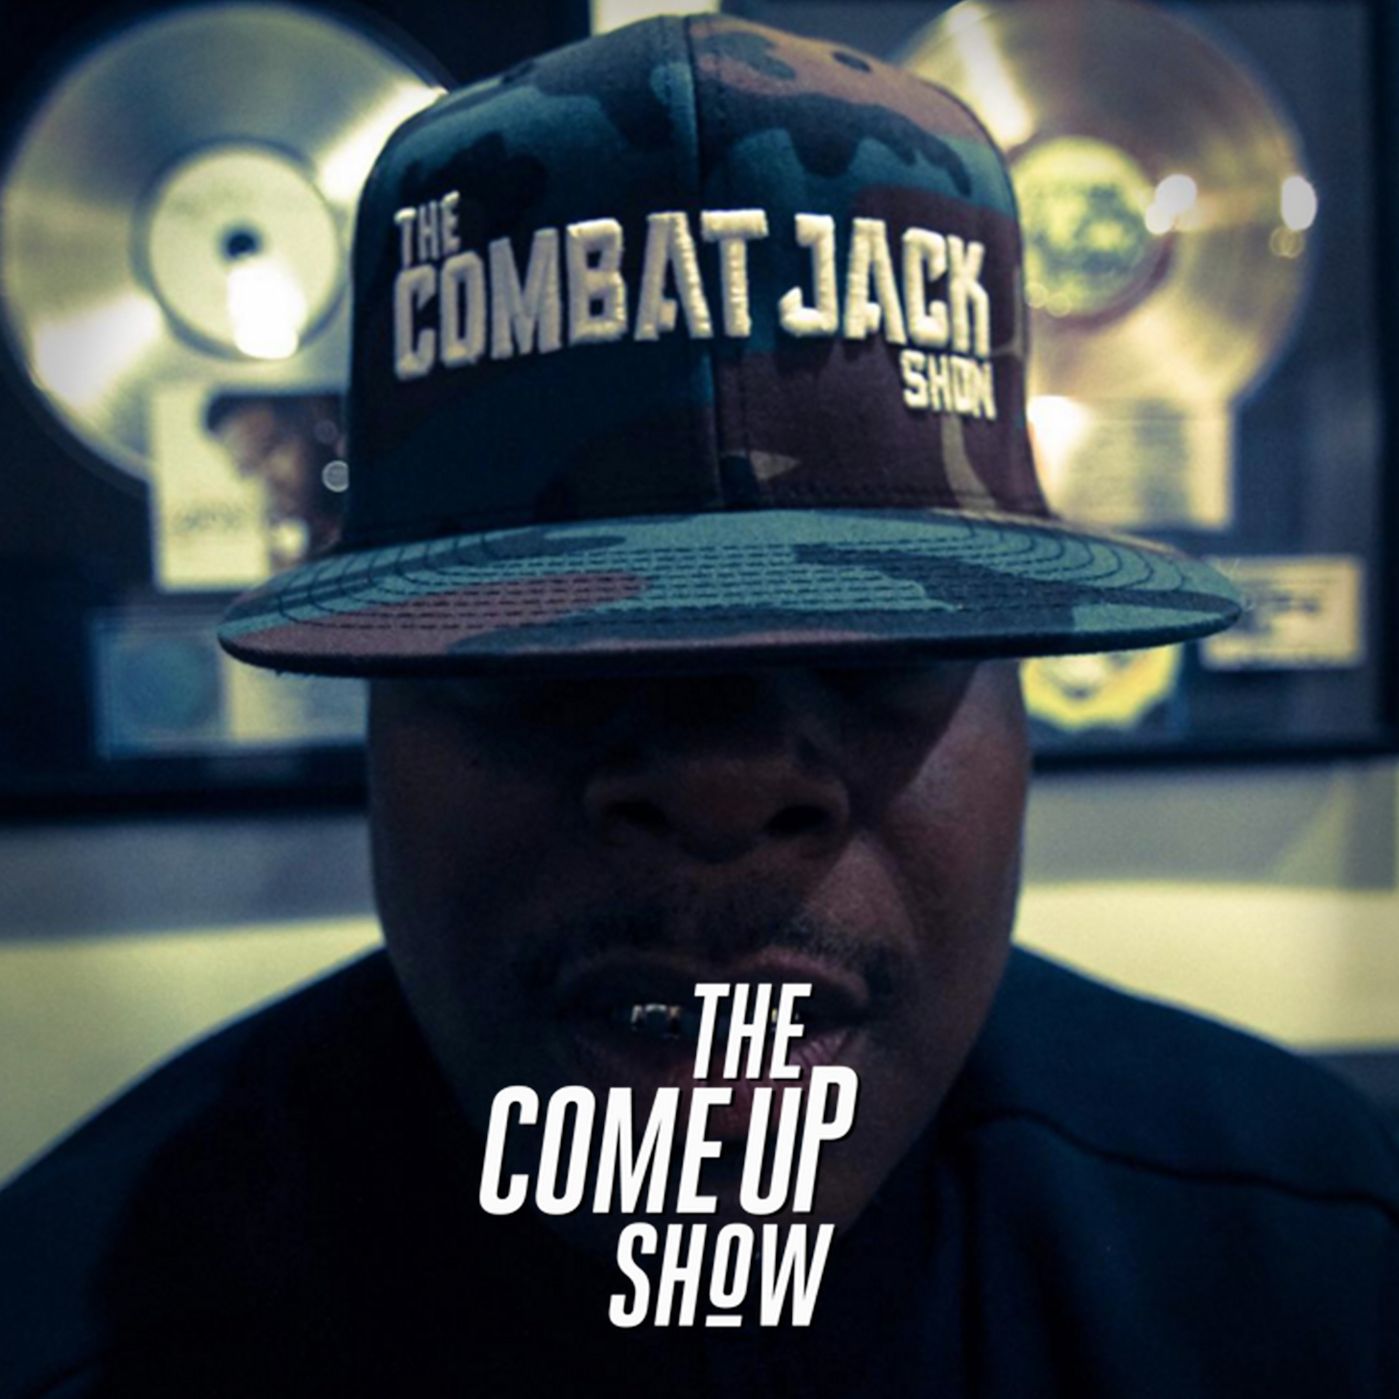 Thumbnail for "Combat Jack: Toronto has a level of innocence and naiveté that I appreciate".